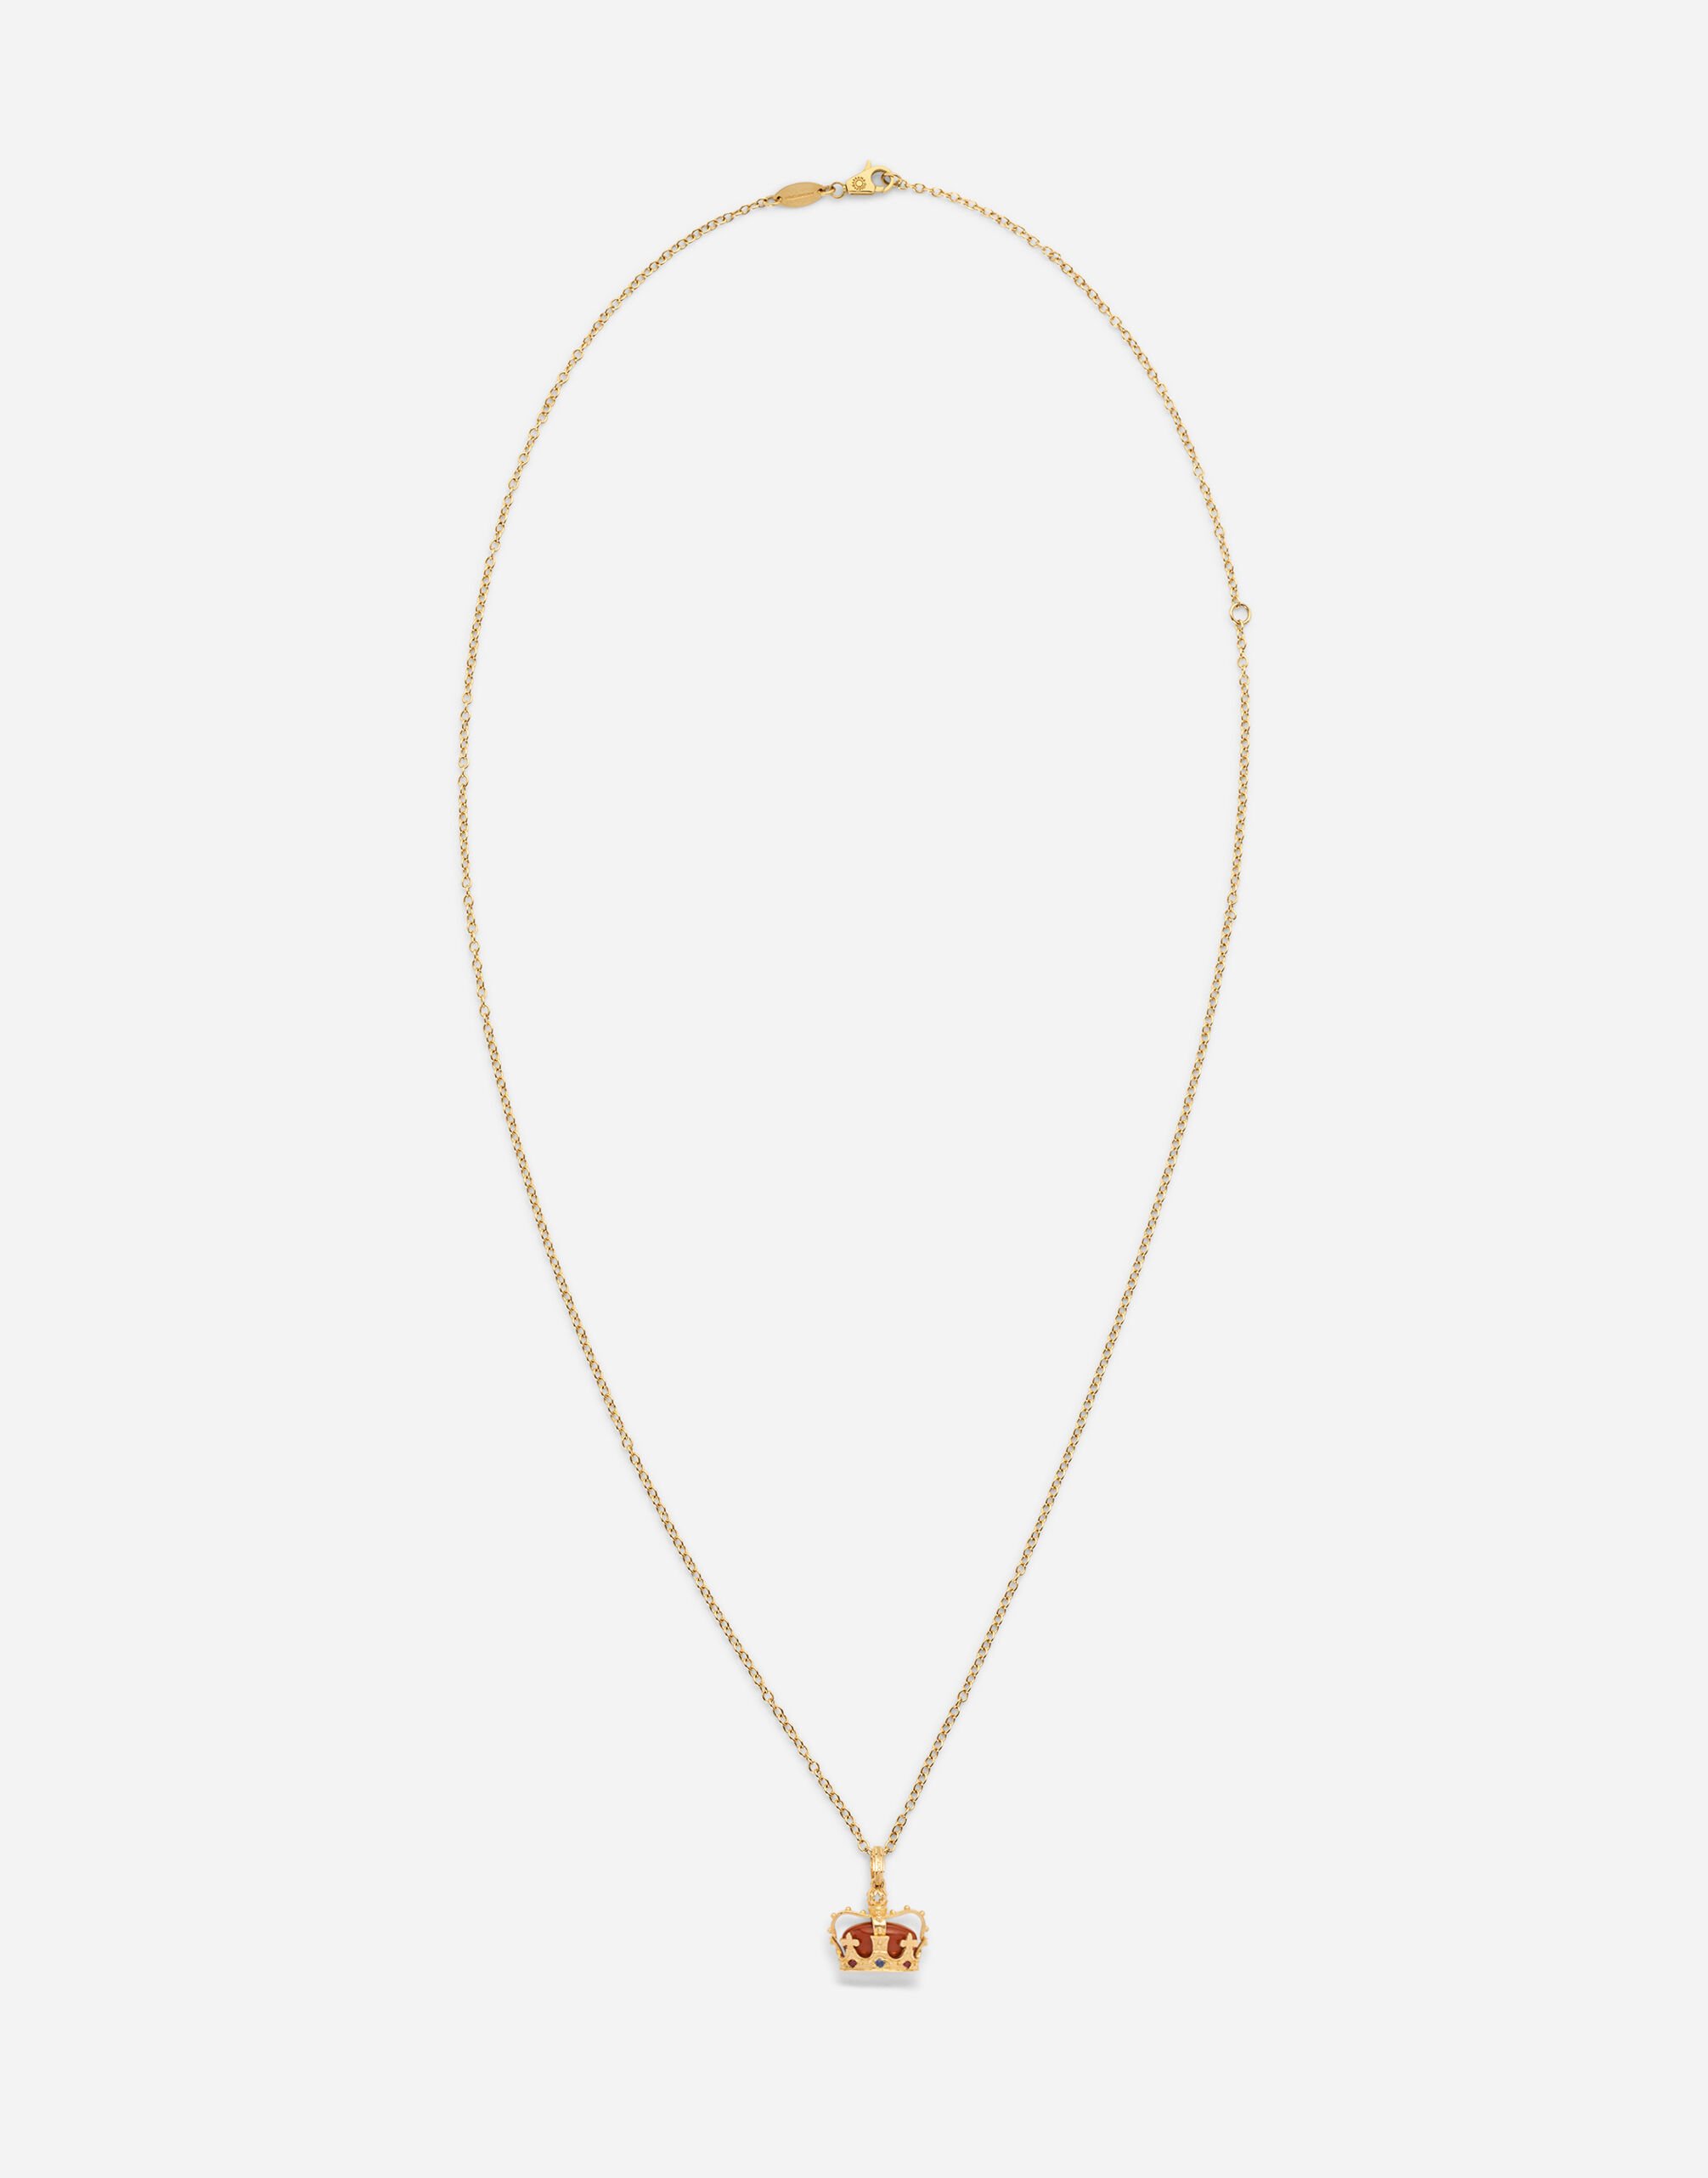 Dolce & Gabbana Crown yellow gold crown pendant with red jasper on the inside Black GY6UETFUFJR